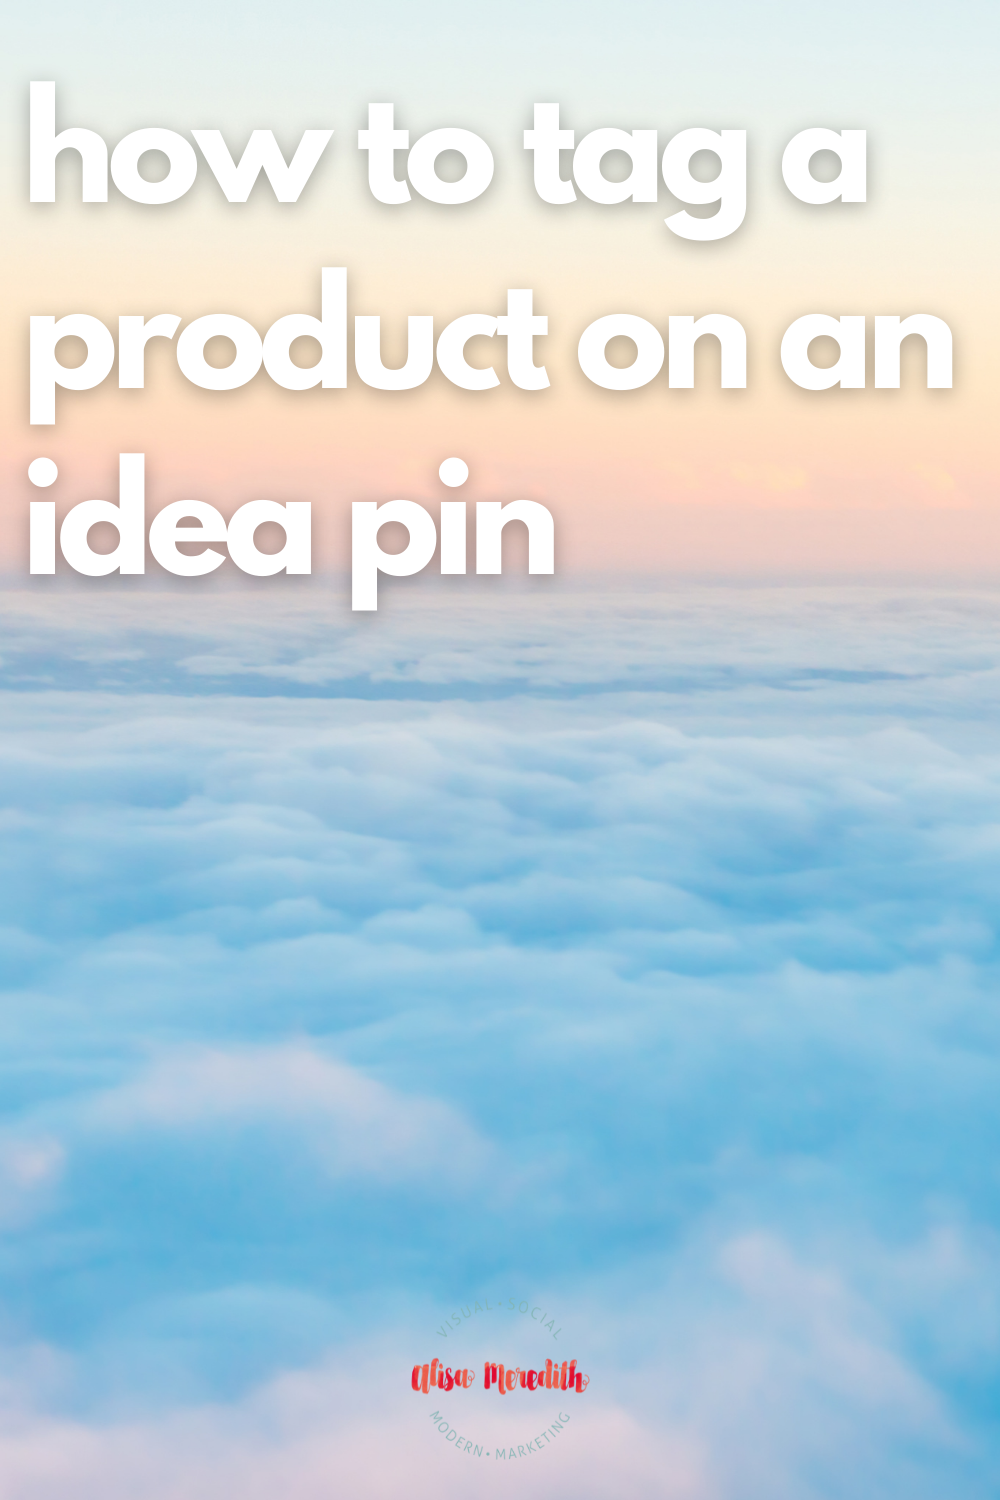 How to Add a Product Tag to an Idea Pin on Pinterest - Alisa Meredith